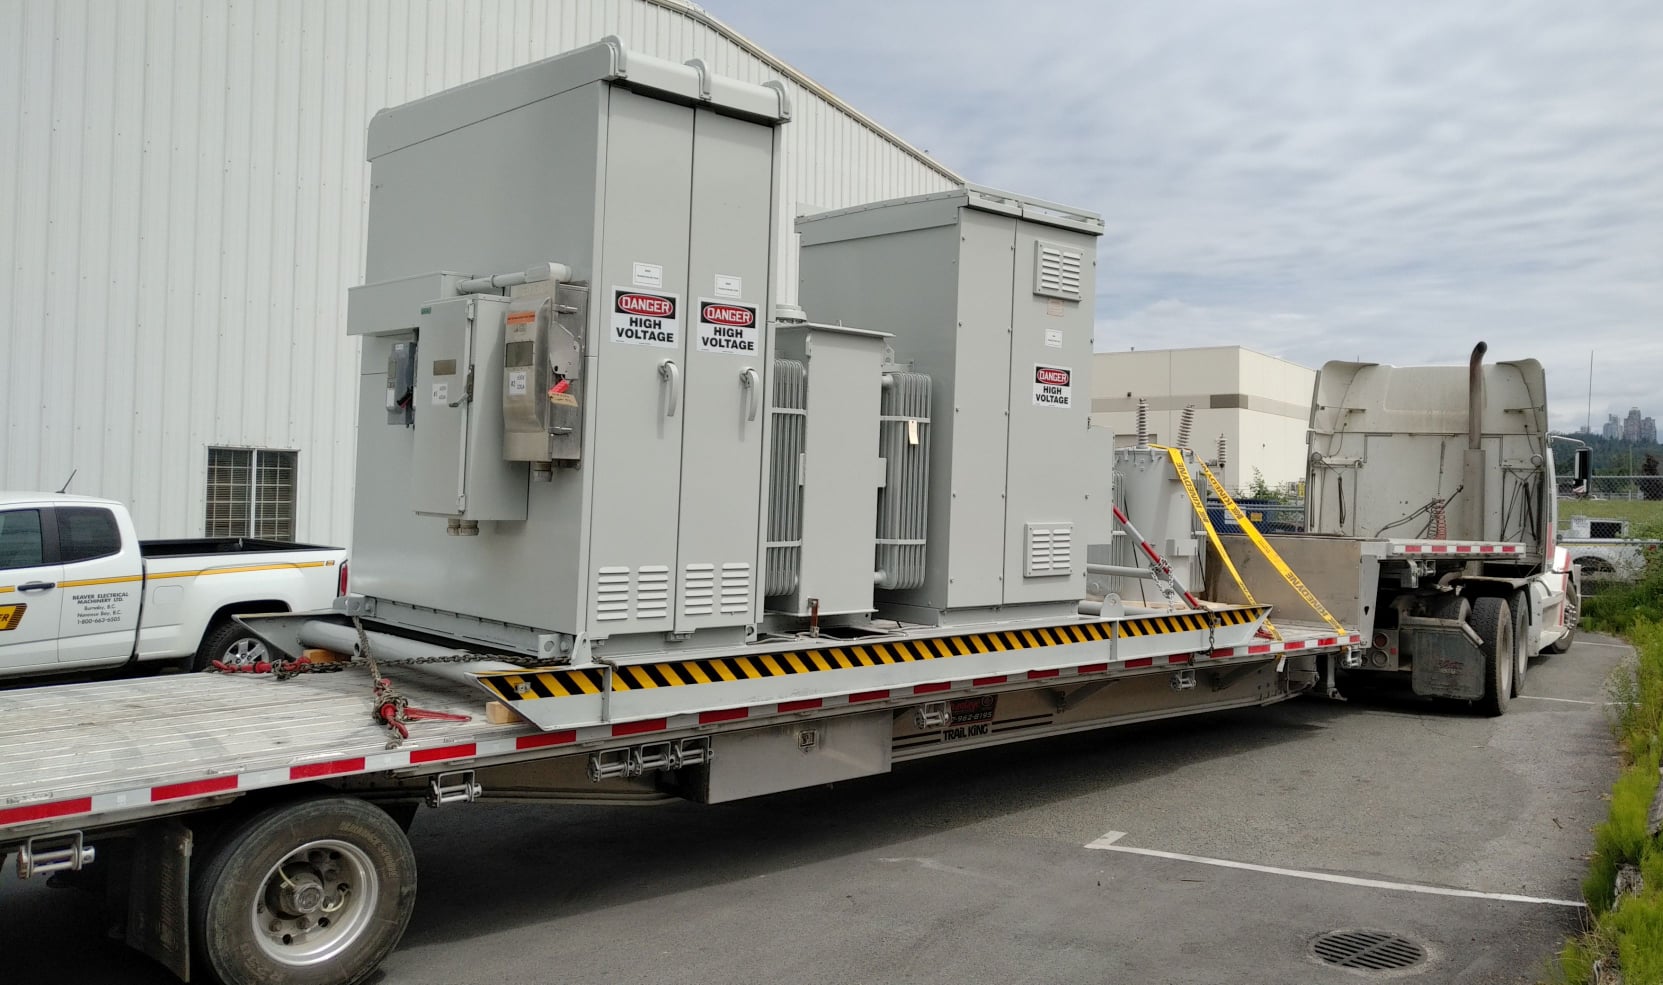 Skid mounted substation loaded on a truck